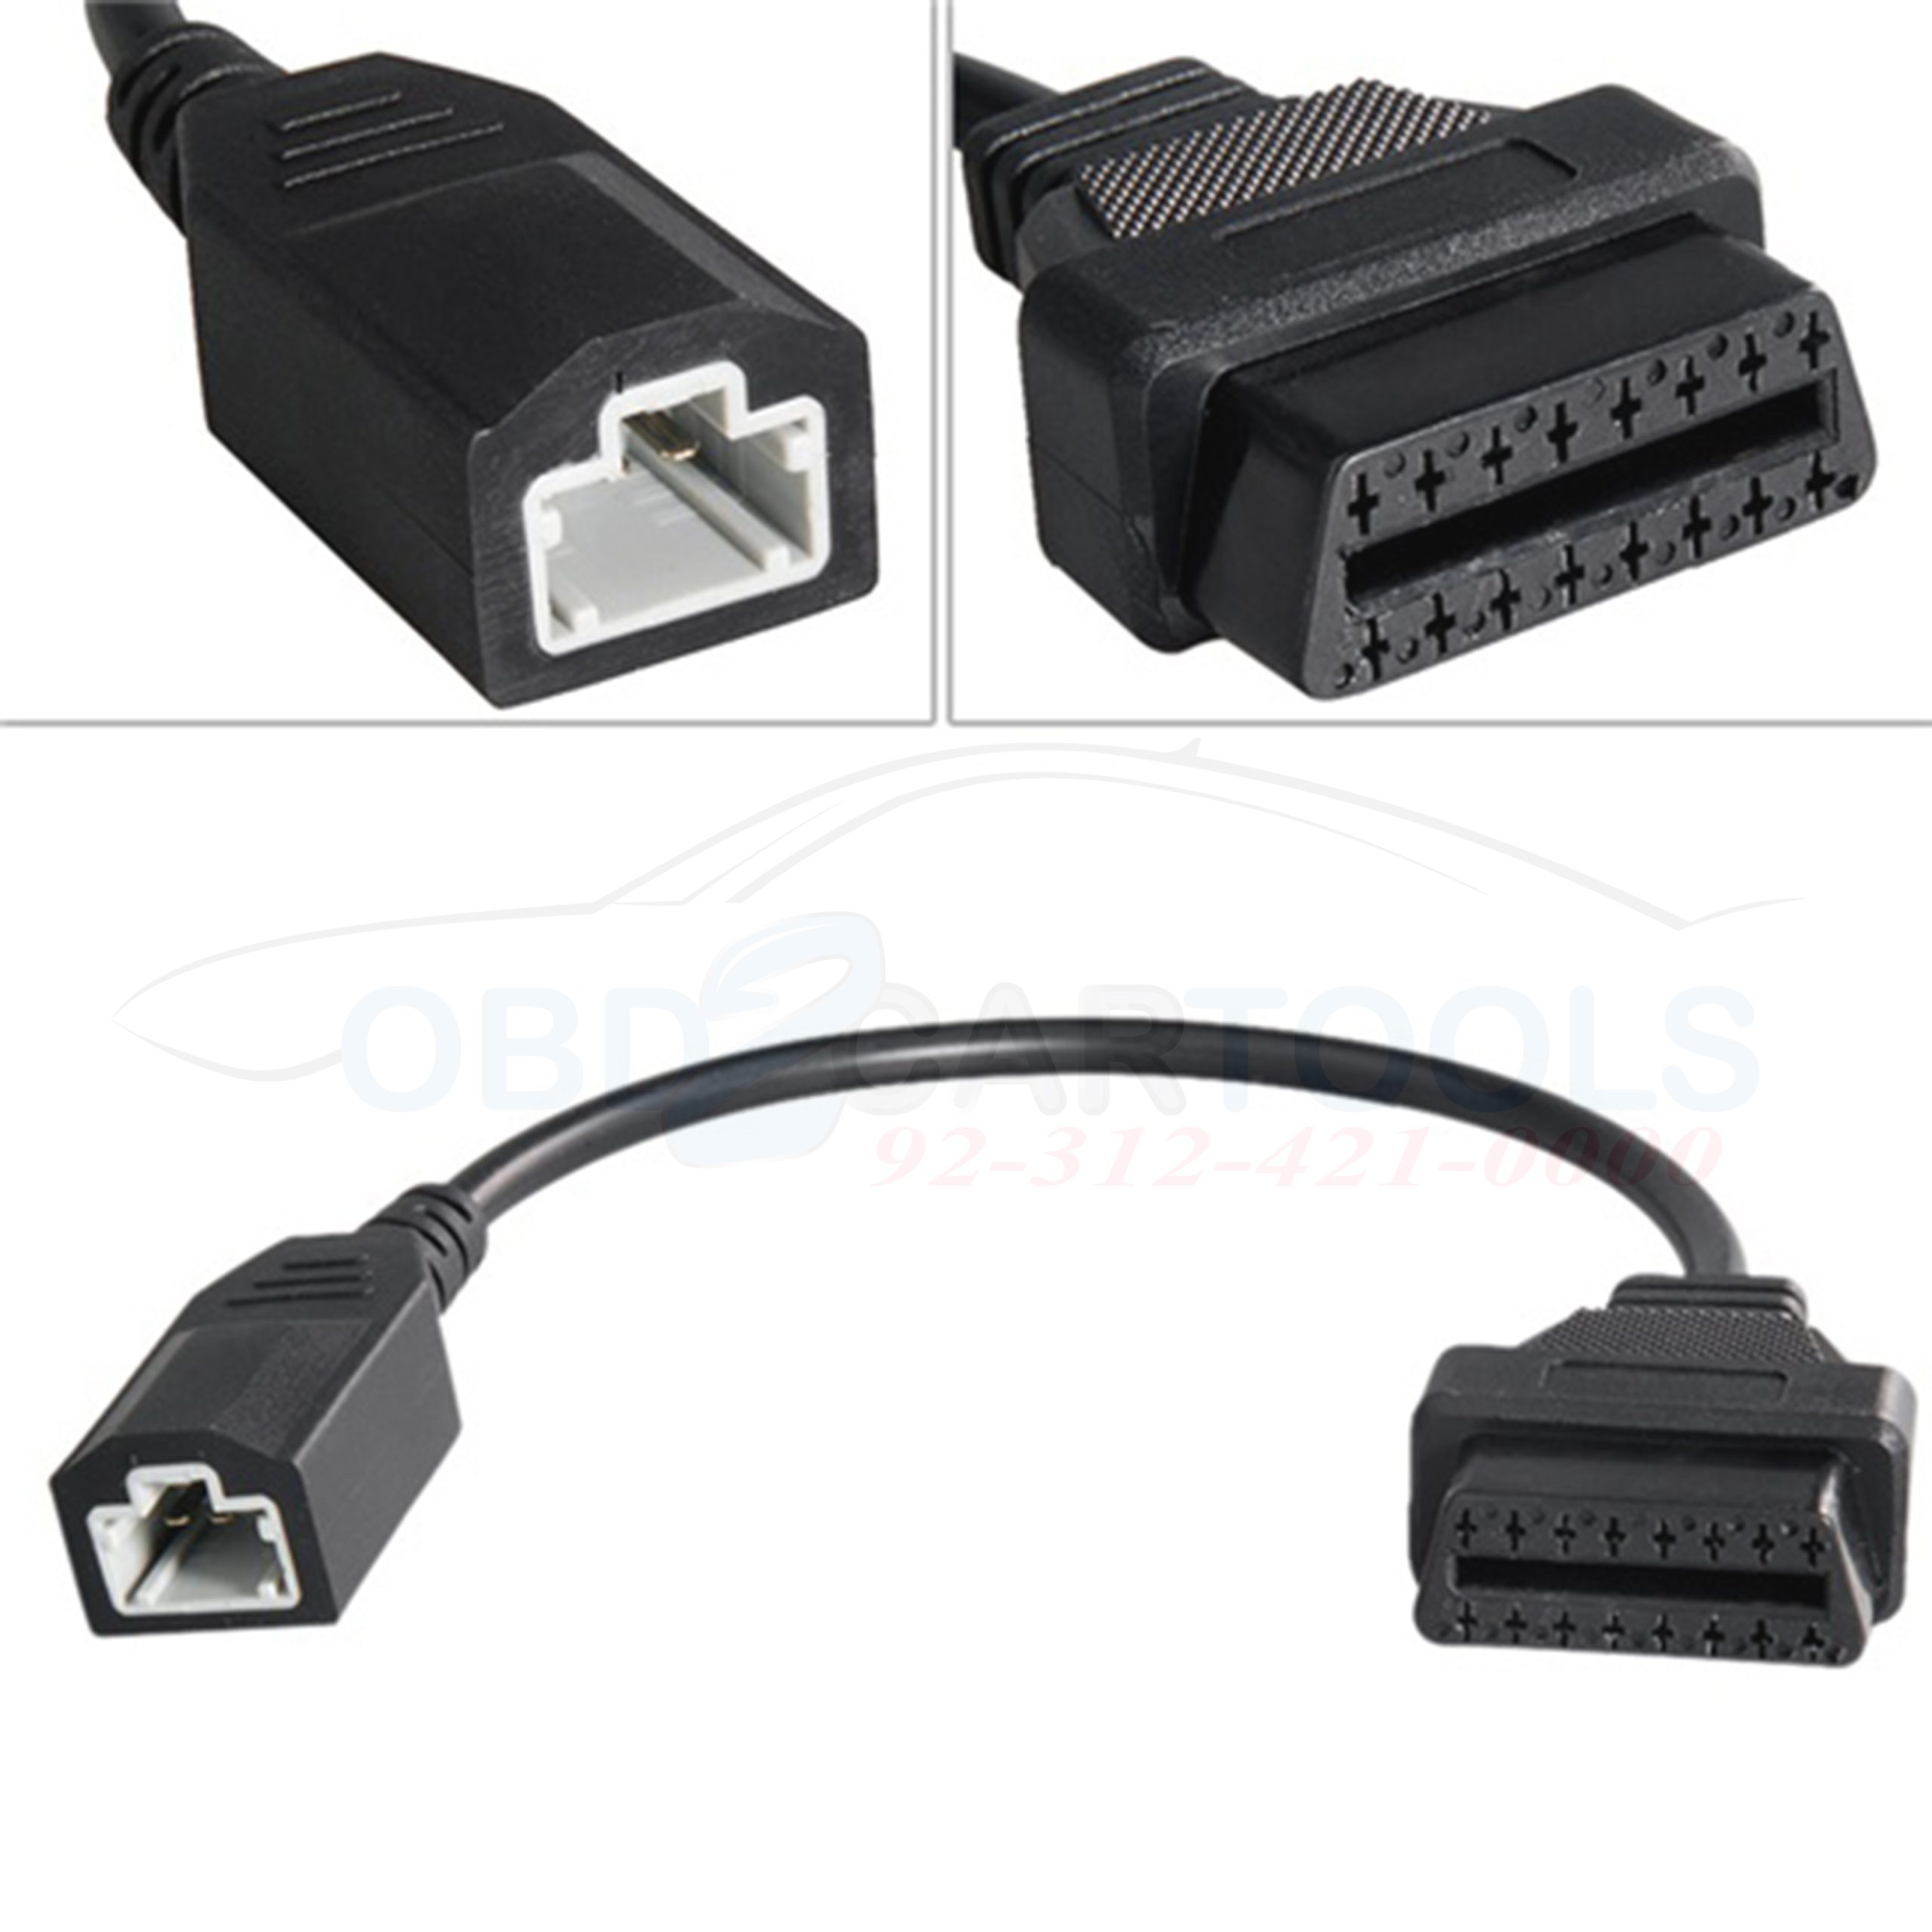 Product image for 3 Pin to 16 Pin OBD2 Connector Adapter Cable for Honda